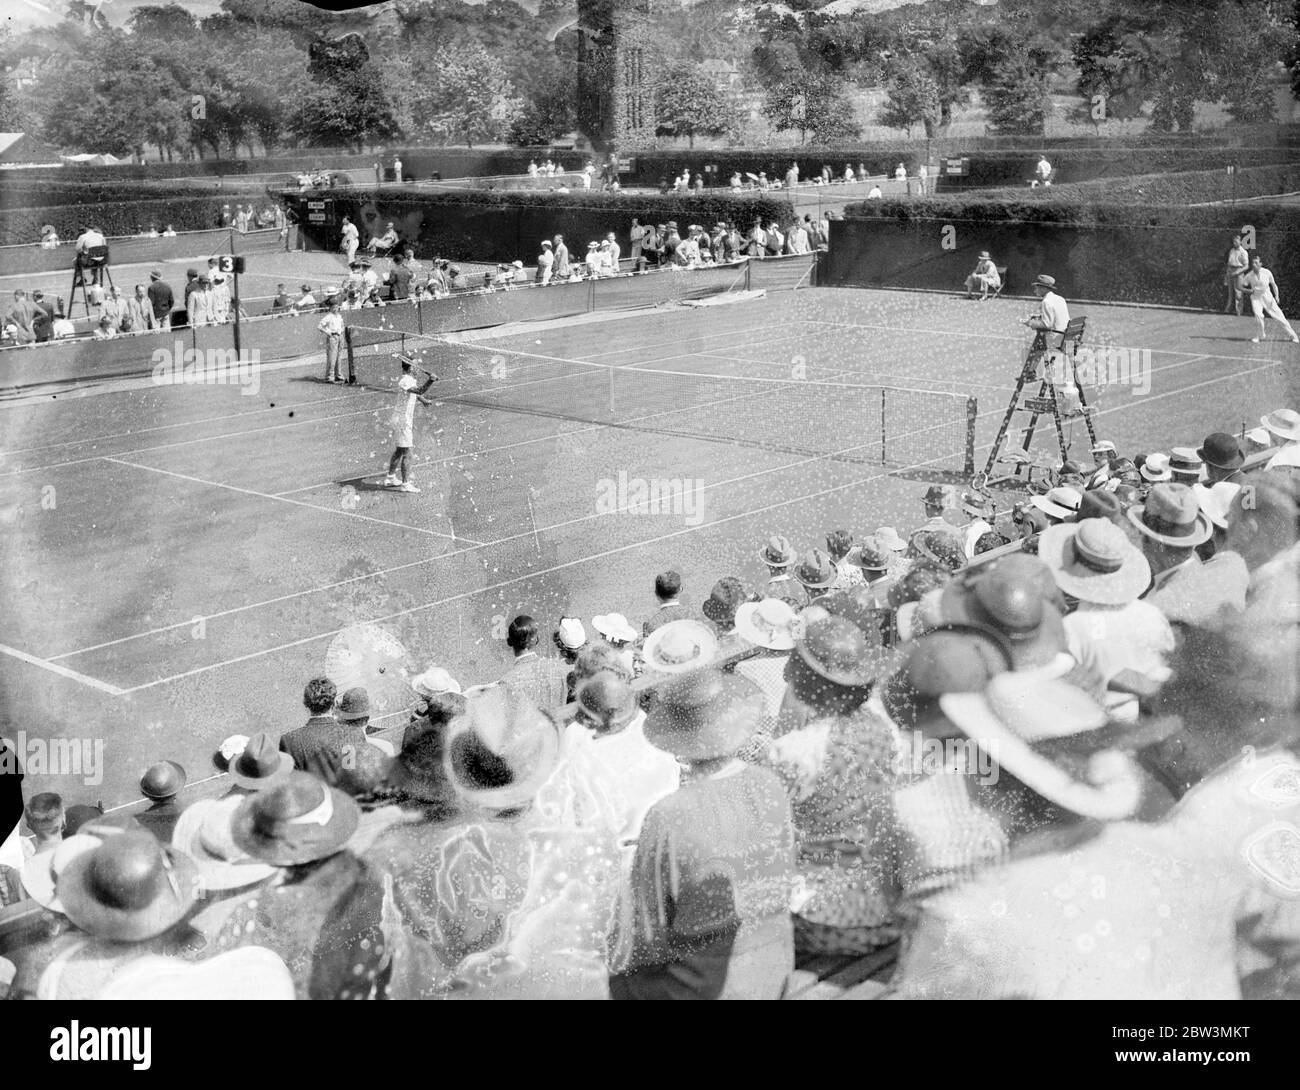 Crowd on No 3 Court Photo Shows : Vivian McGrath of Australia against Henry B. Purcell of Irland 23 Jun 1936 Stock Photo